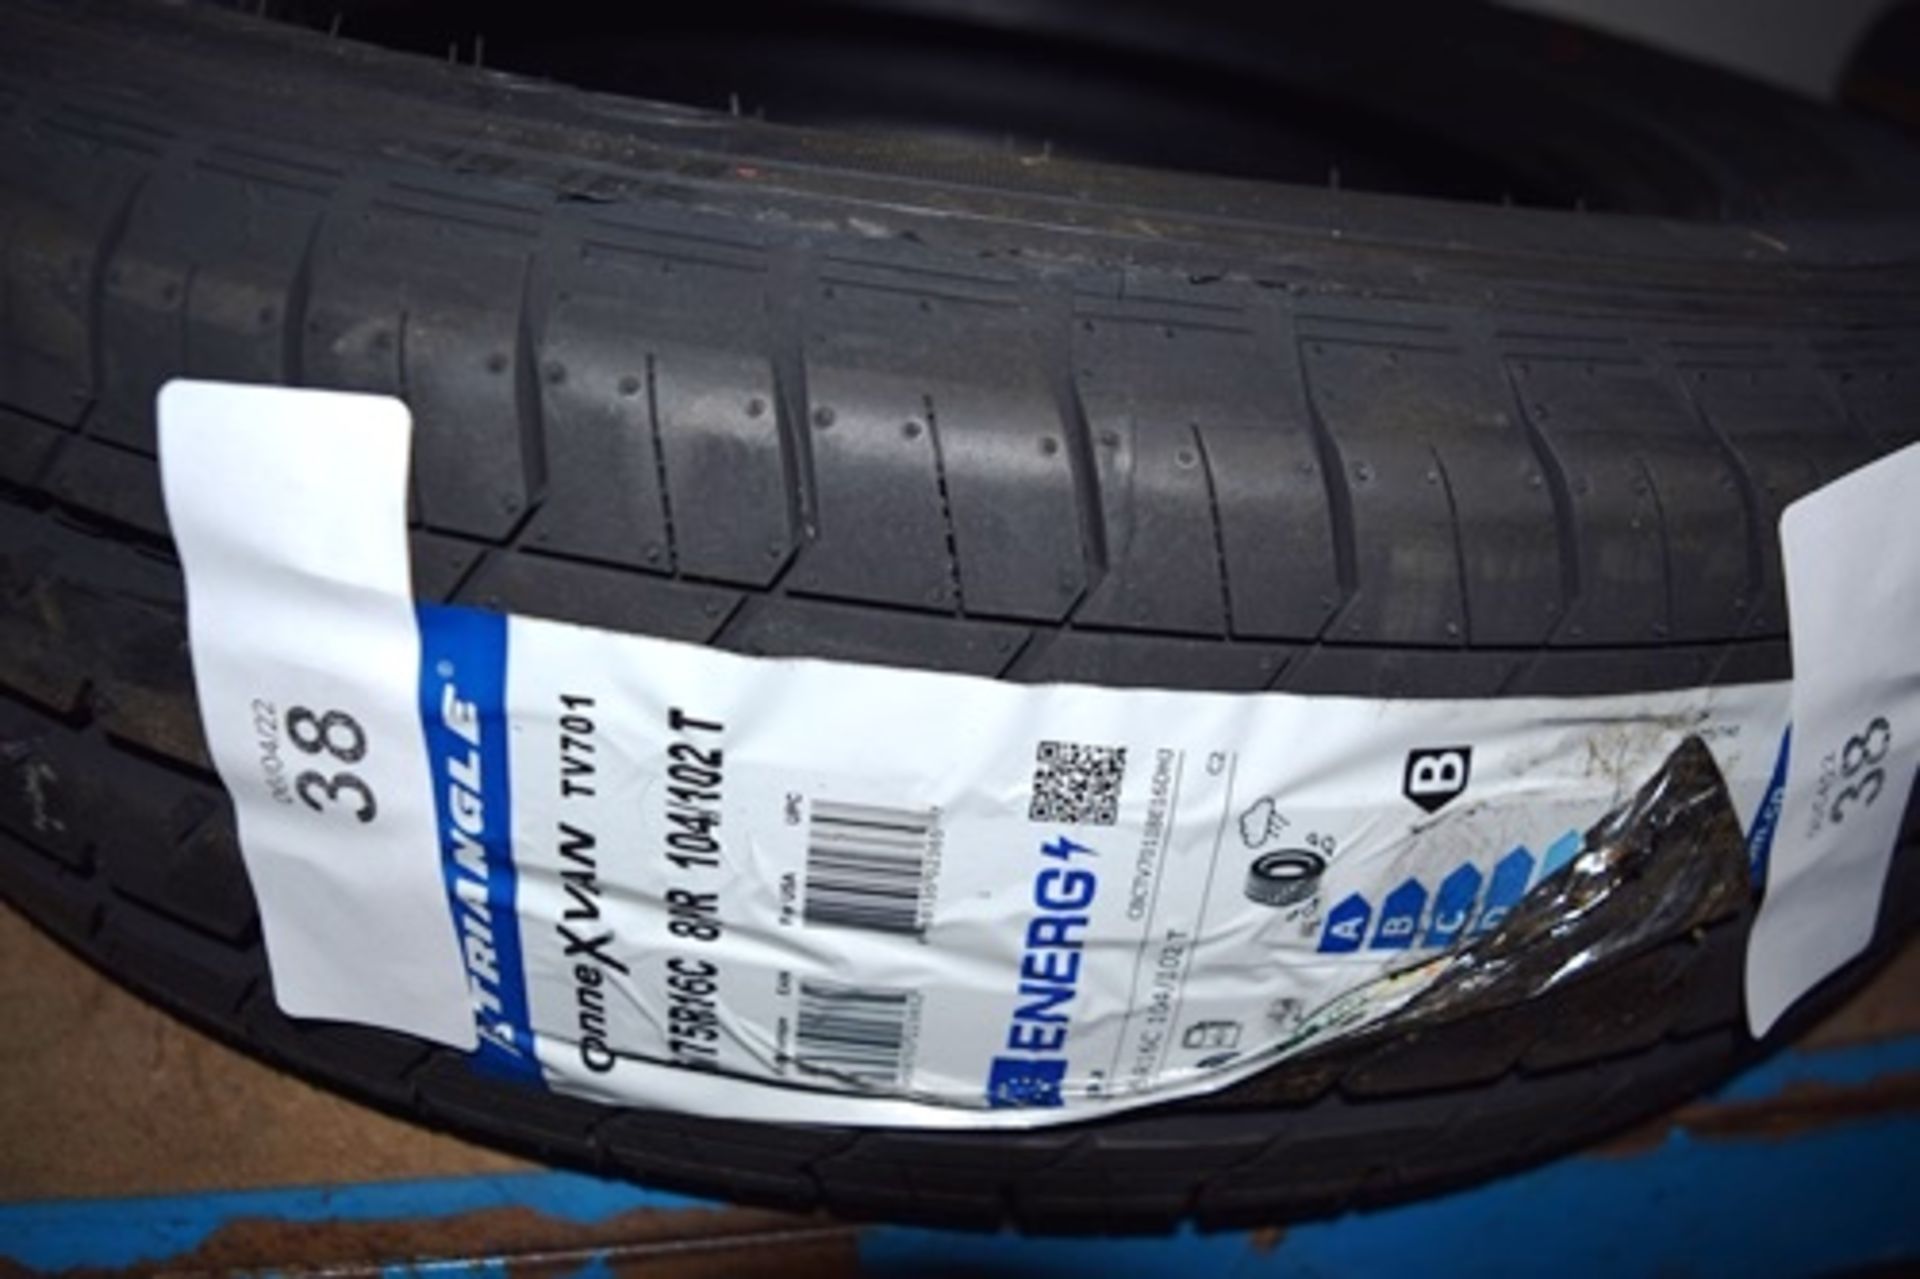 1 x Triangle Onne X Van TV701 tyre, size 185/75R16C 8PR 104/102T - New with label (GS4)